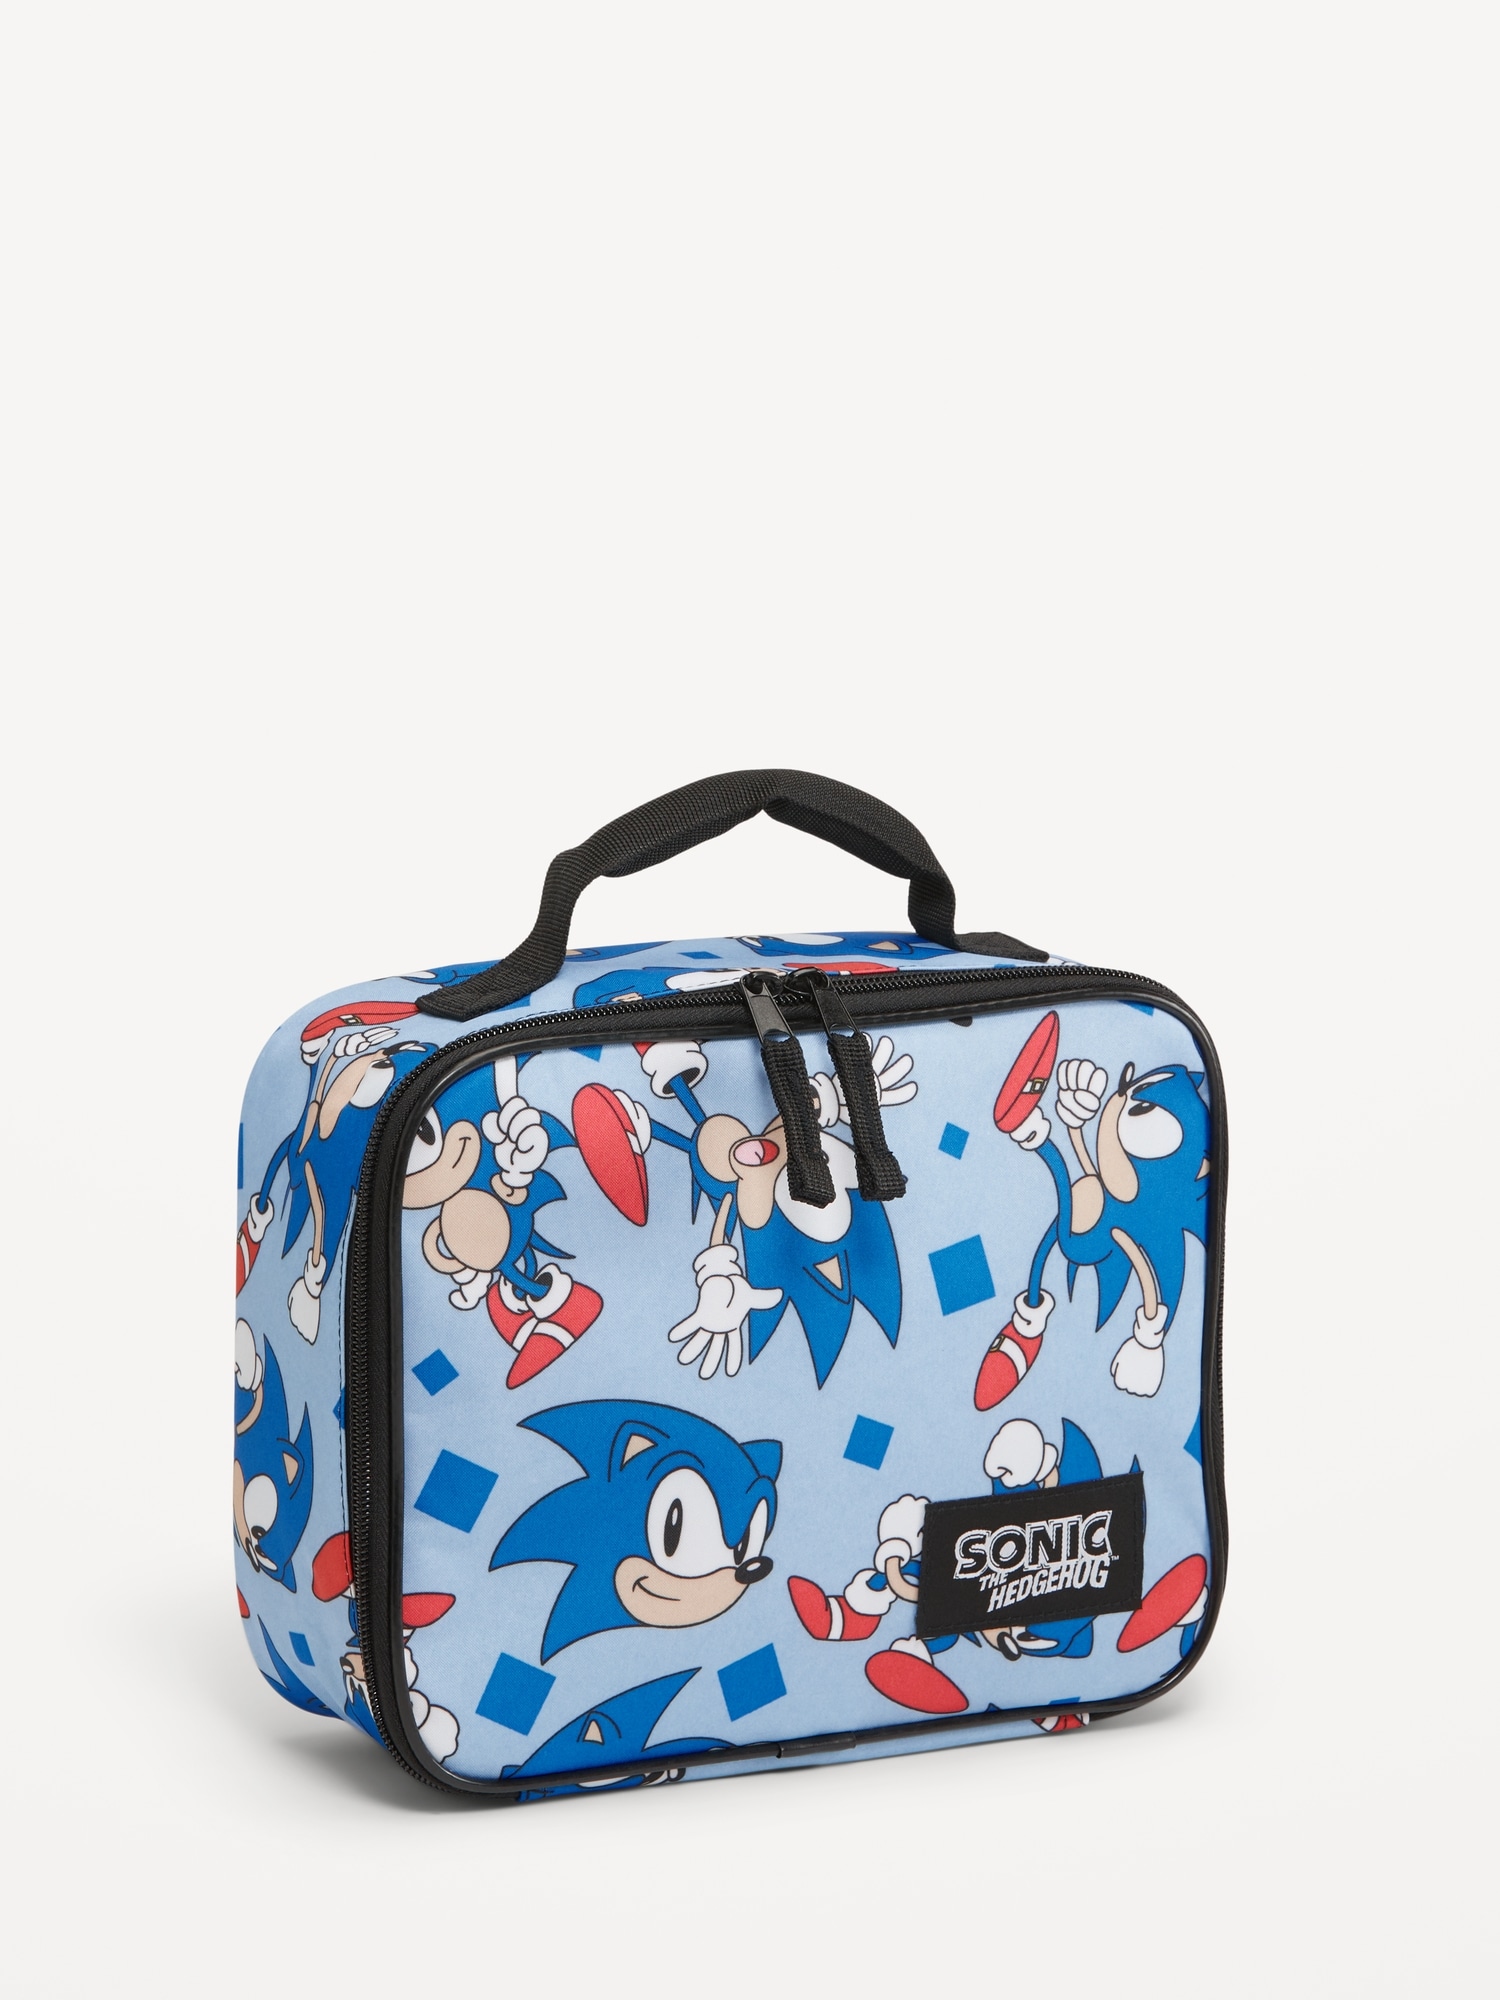 Sonic The Hedgehog™ Lunch Bag for Kids